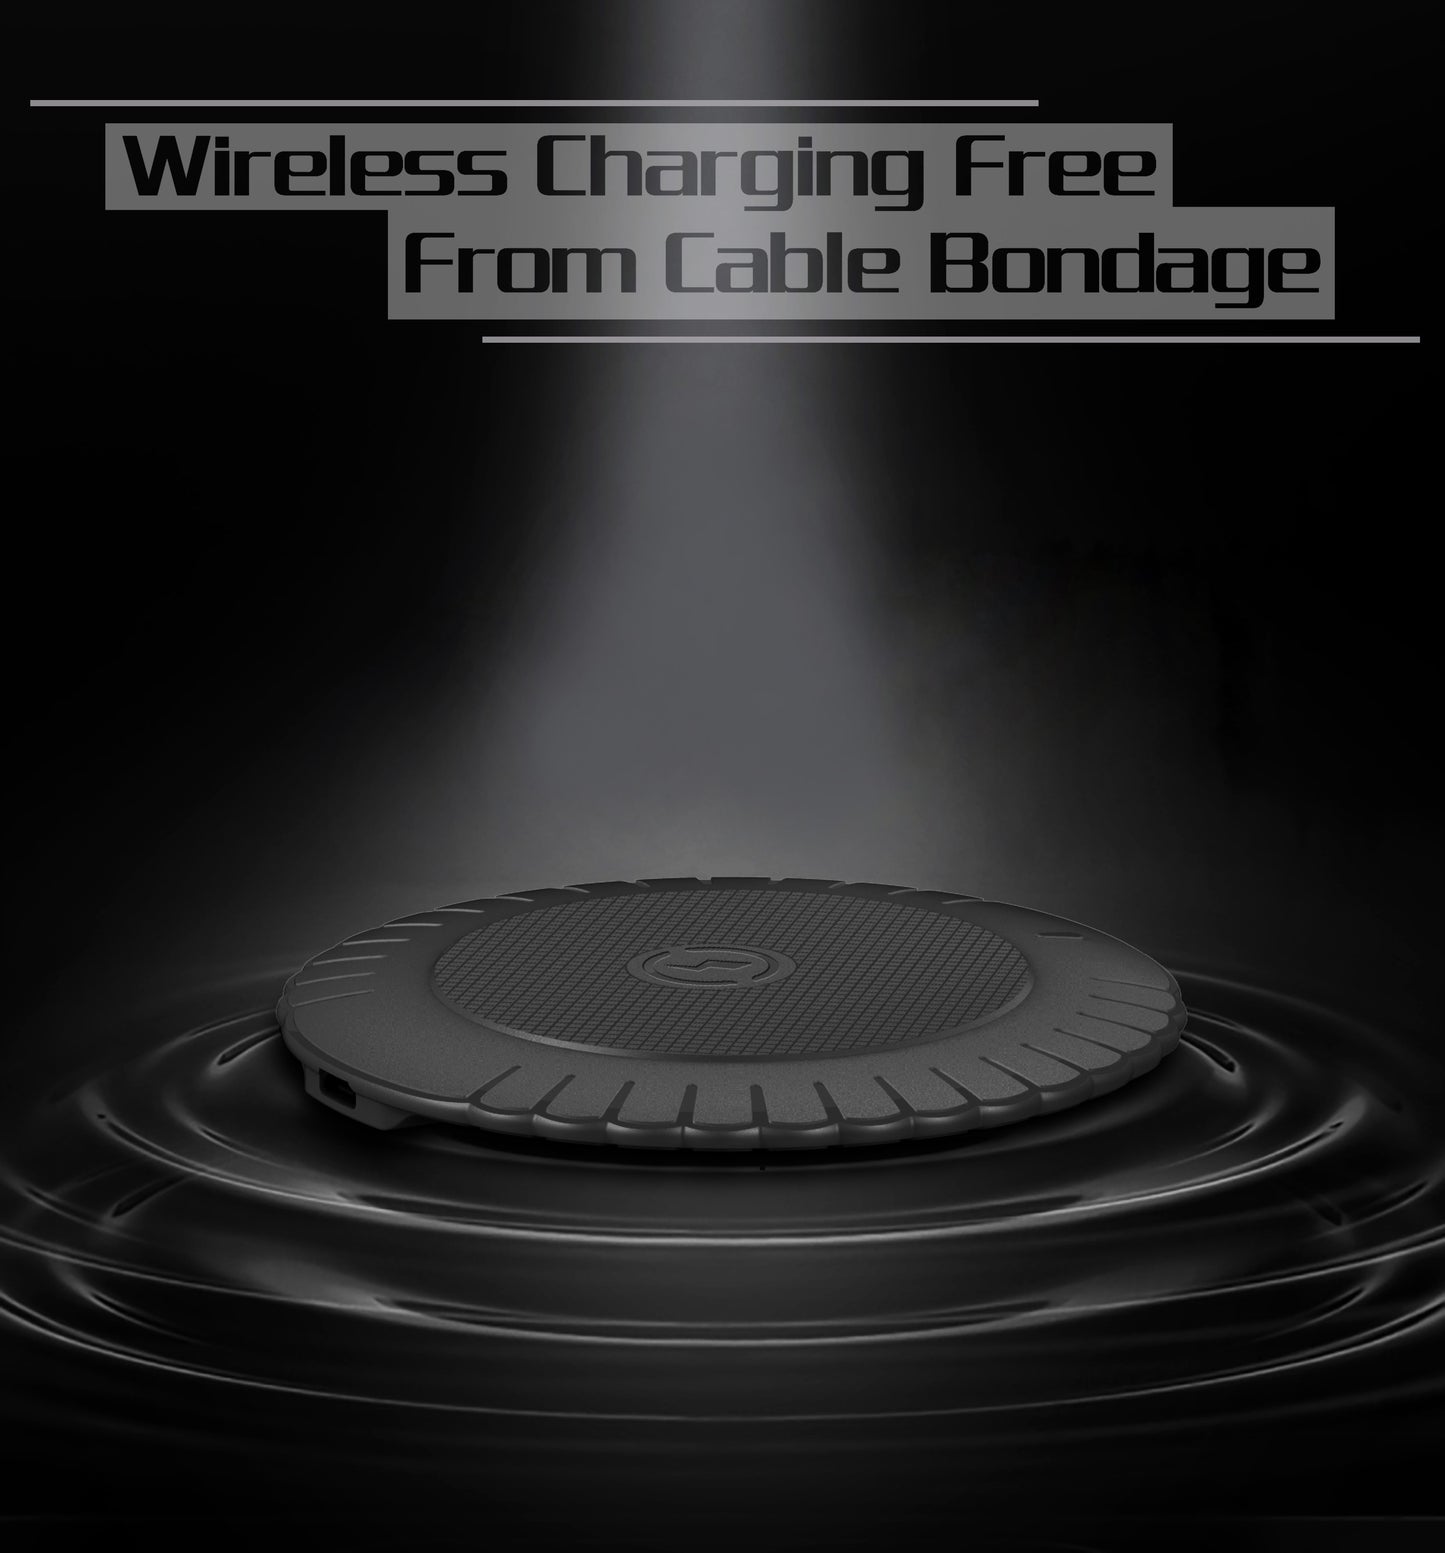 Gifts cheap 5W 10W wireless charger pad